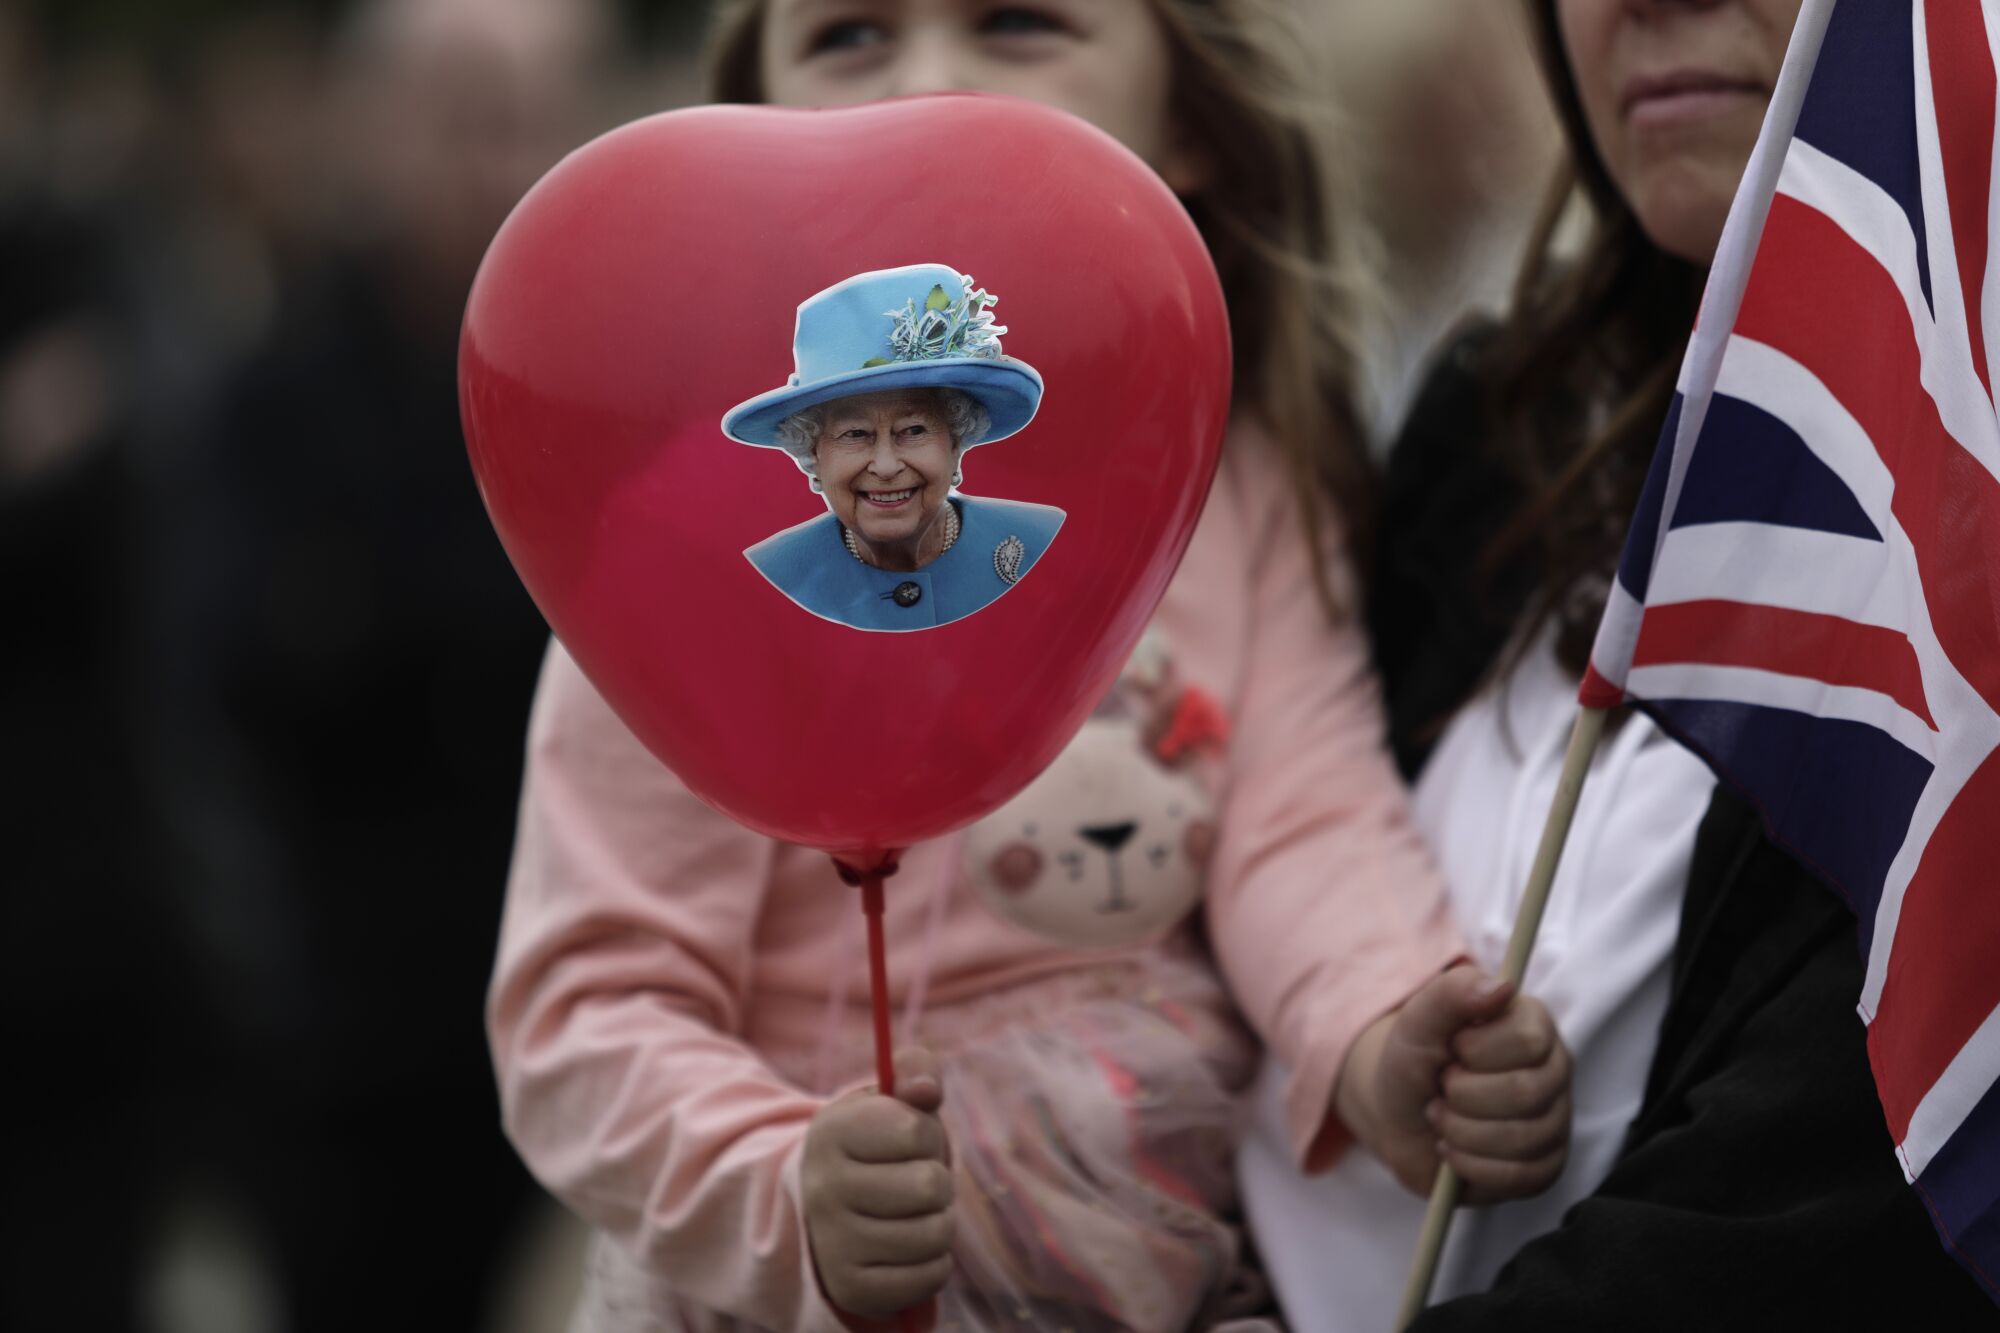 A girl holds a balloon with the queen's photo and a Union Jack flag.